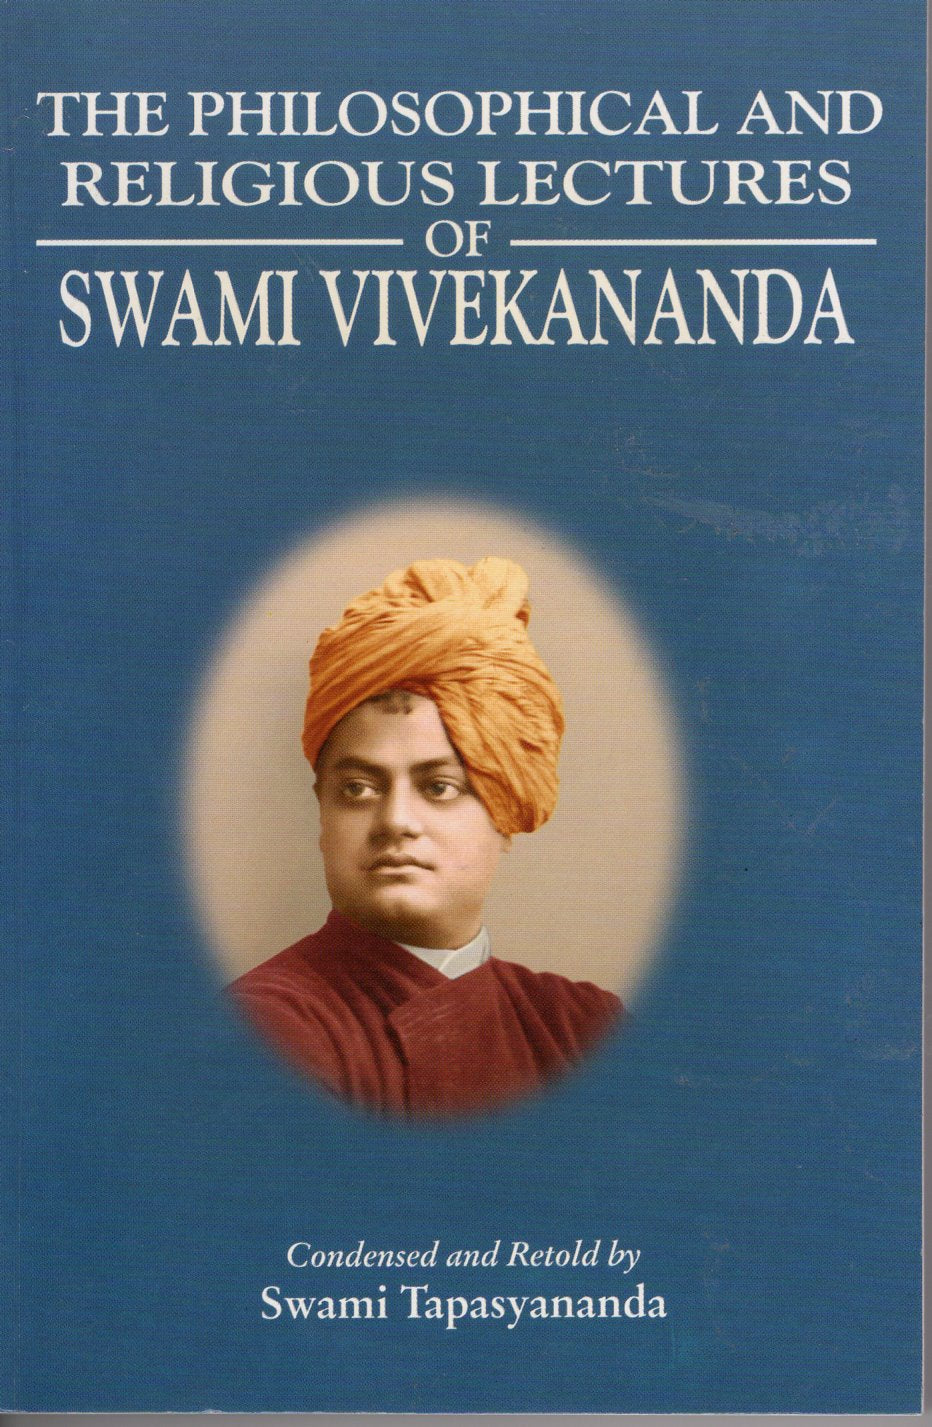 The Philosophical and Religious Lectures of SWAMI VIVEKANANDA